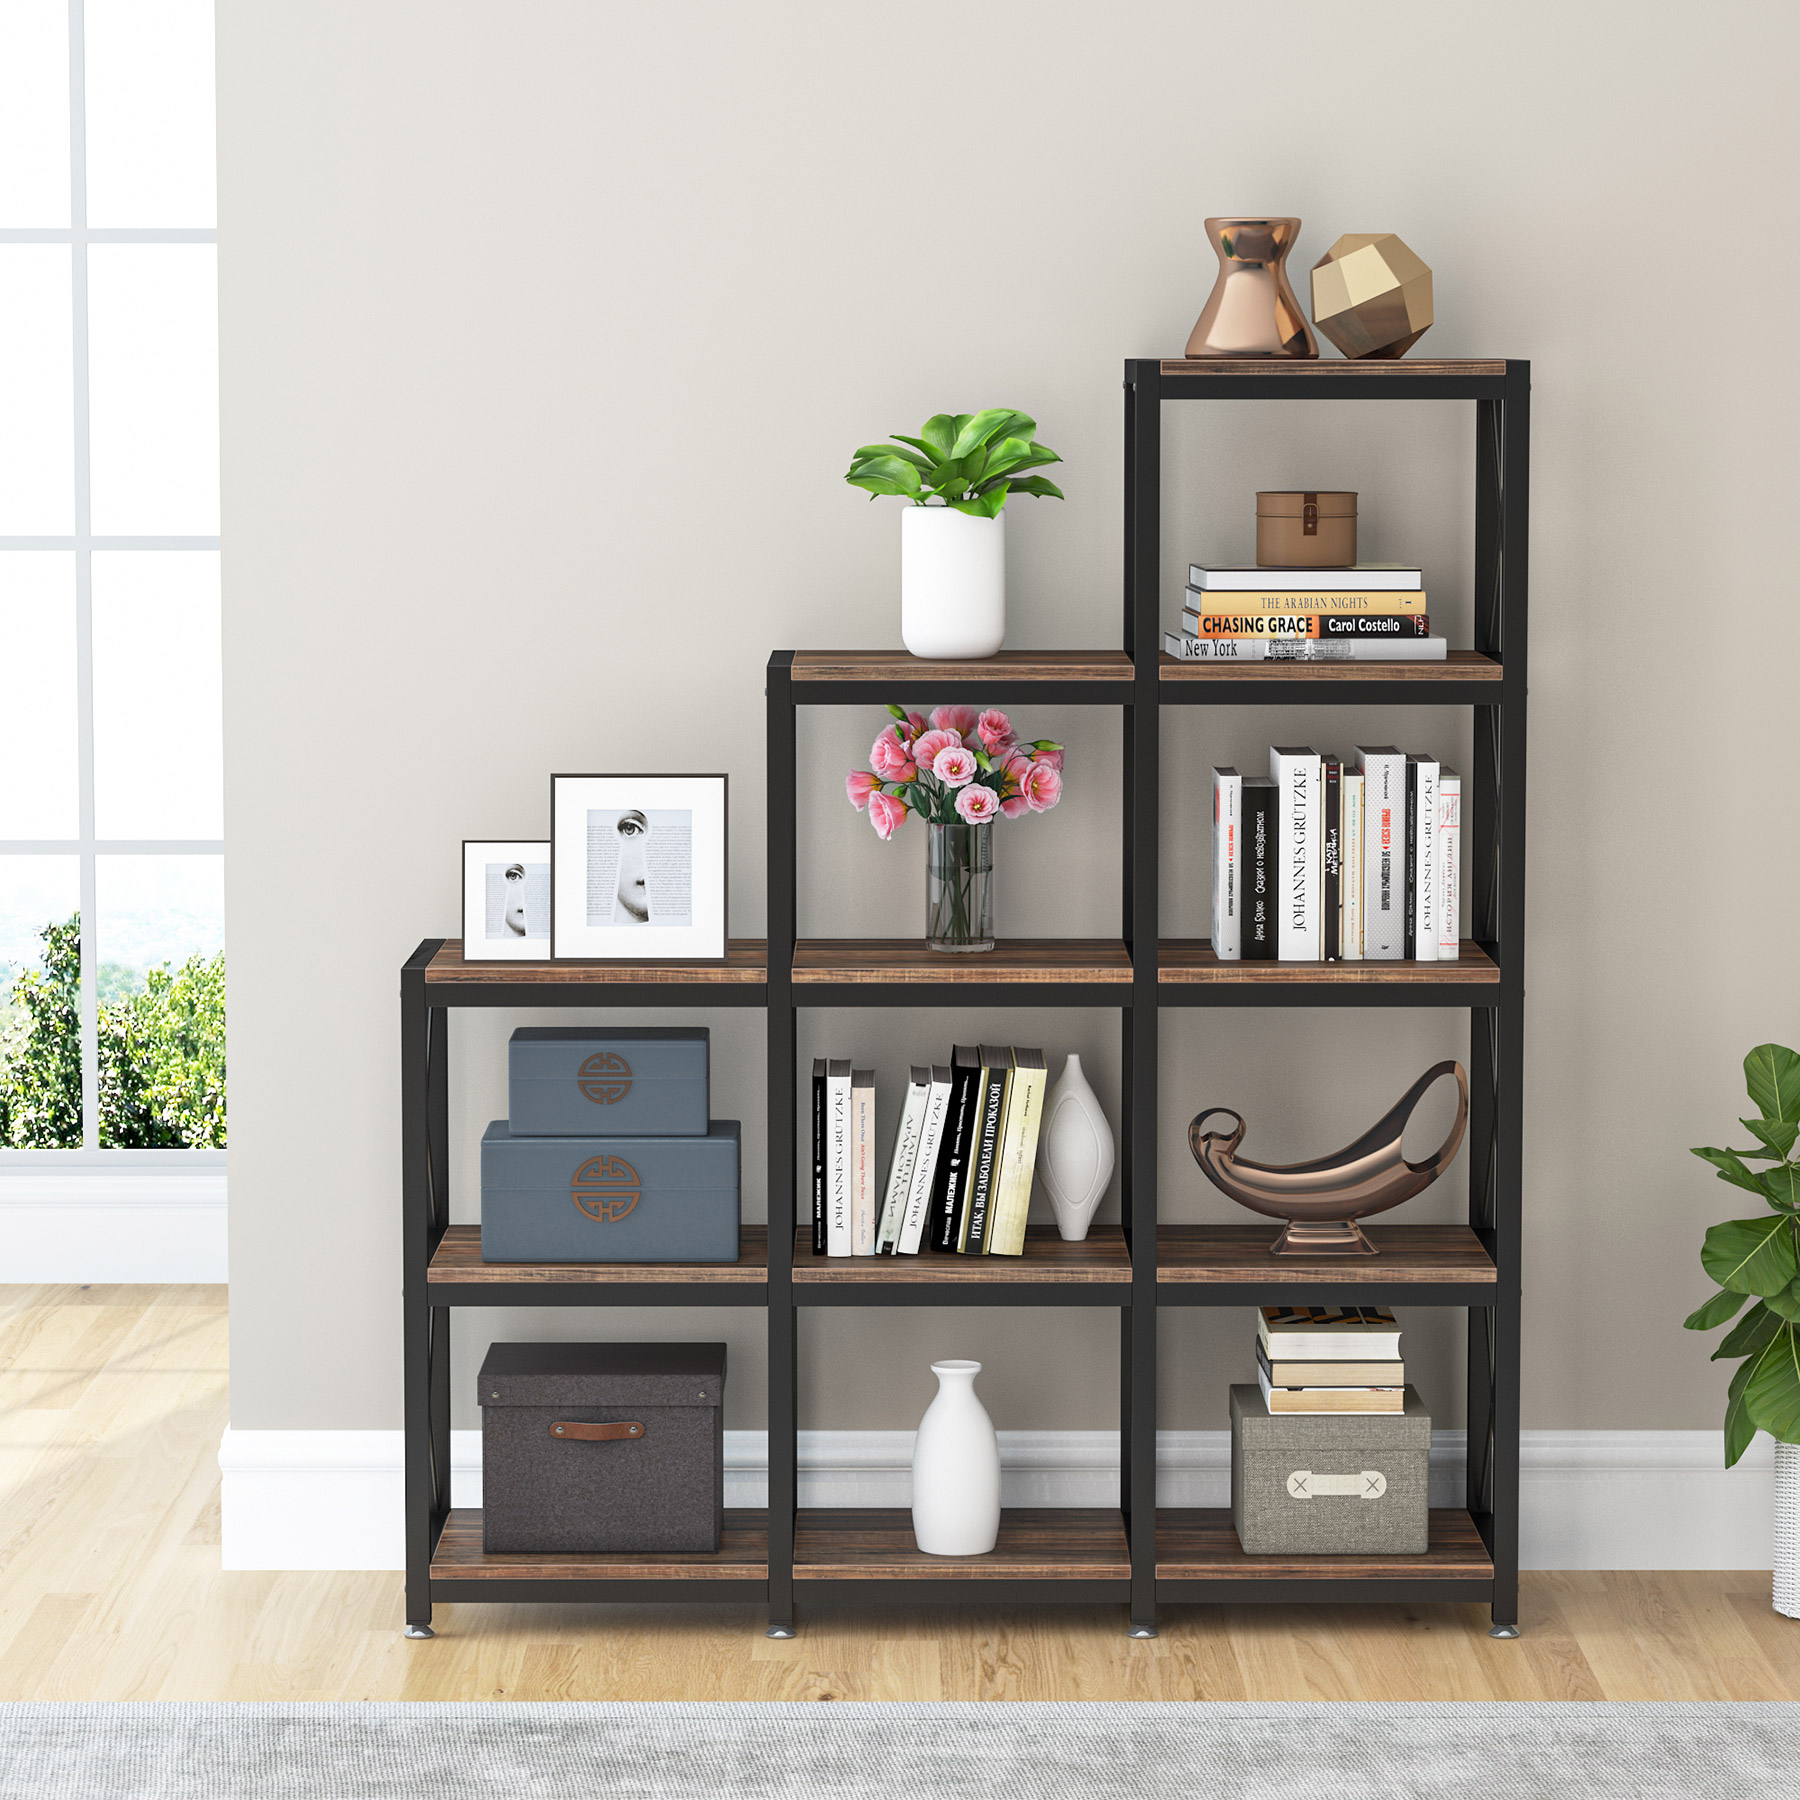 Tribesigns 12-shelf Bookcase, 5-tier Industrial Step Bookshelf for Home Office, Rustic Brown - image 3 of 7